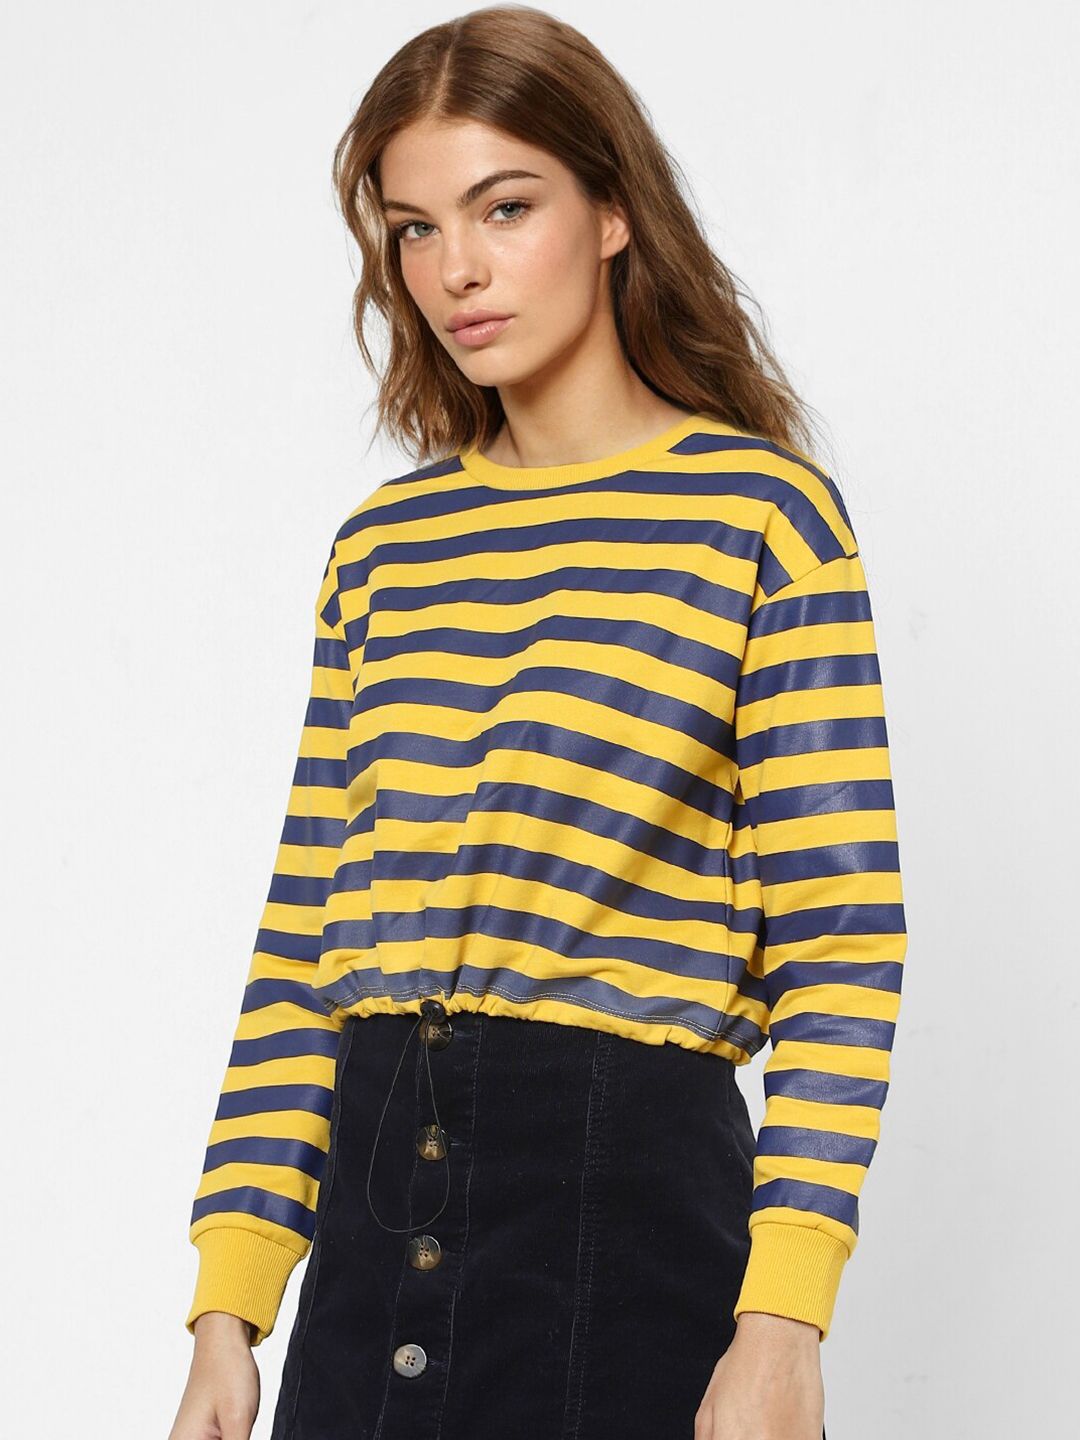 ONLY Women Yellow & Navy Blue Striped Cotton Sweatshirt Price in India